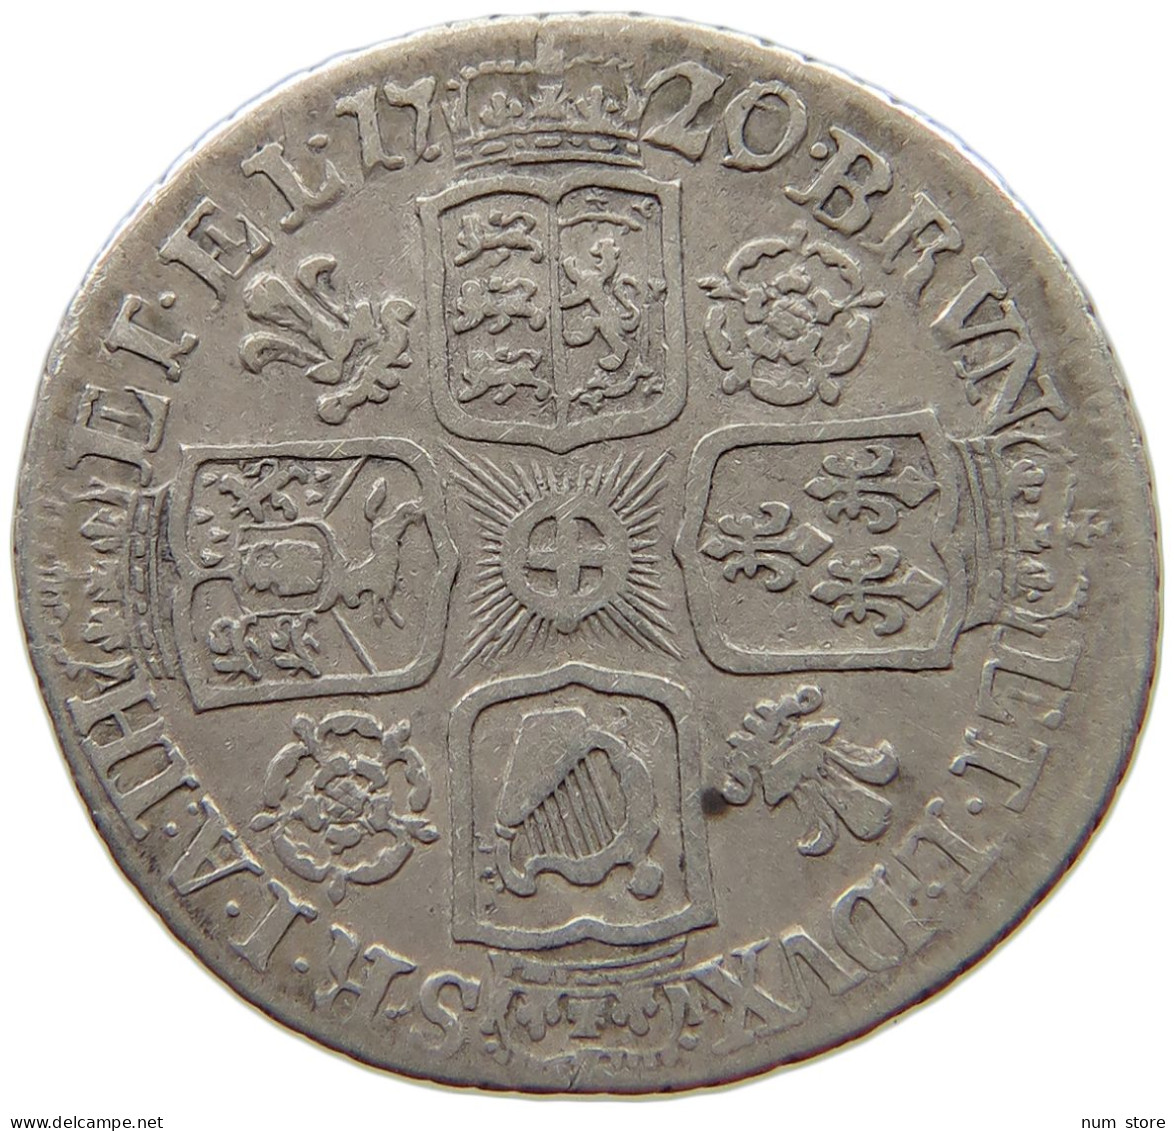 GREAT BRITAIN SIXPENCE 1720 / 17 George I. (1714-1727) #t148 0543 - G. 6 Pence